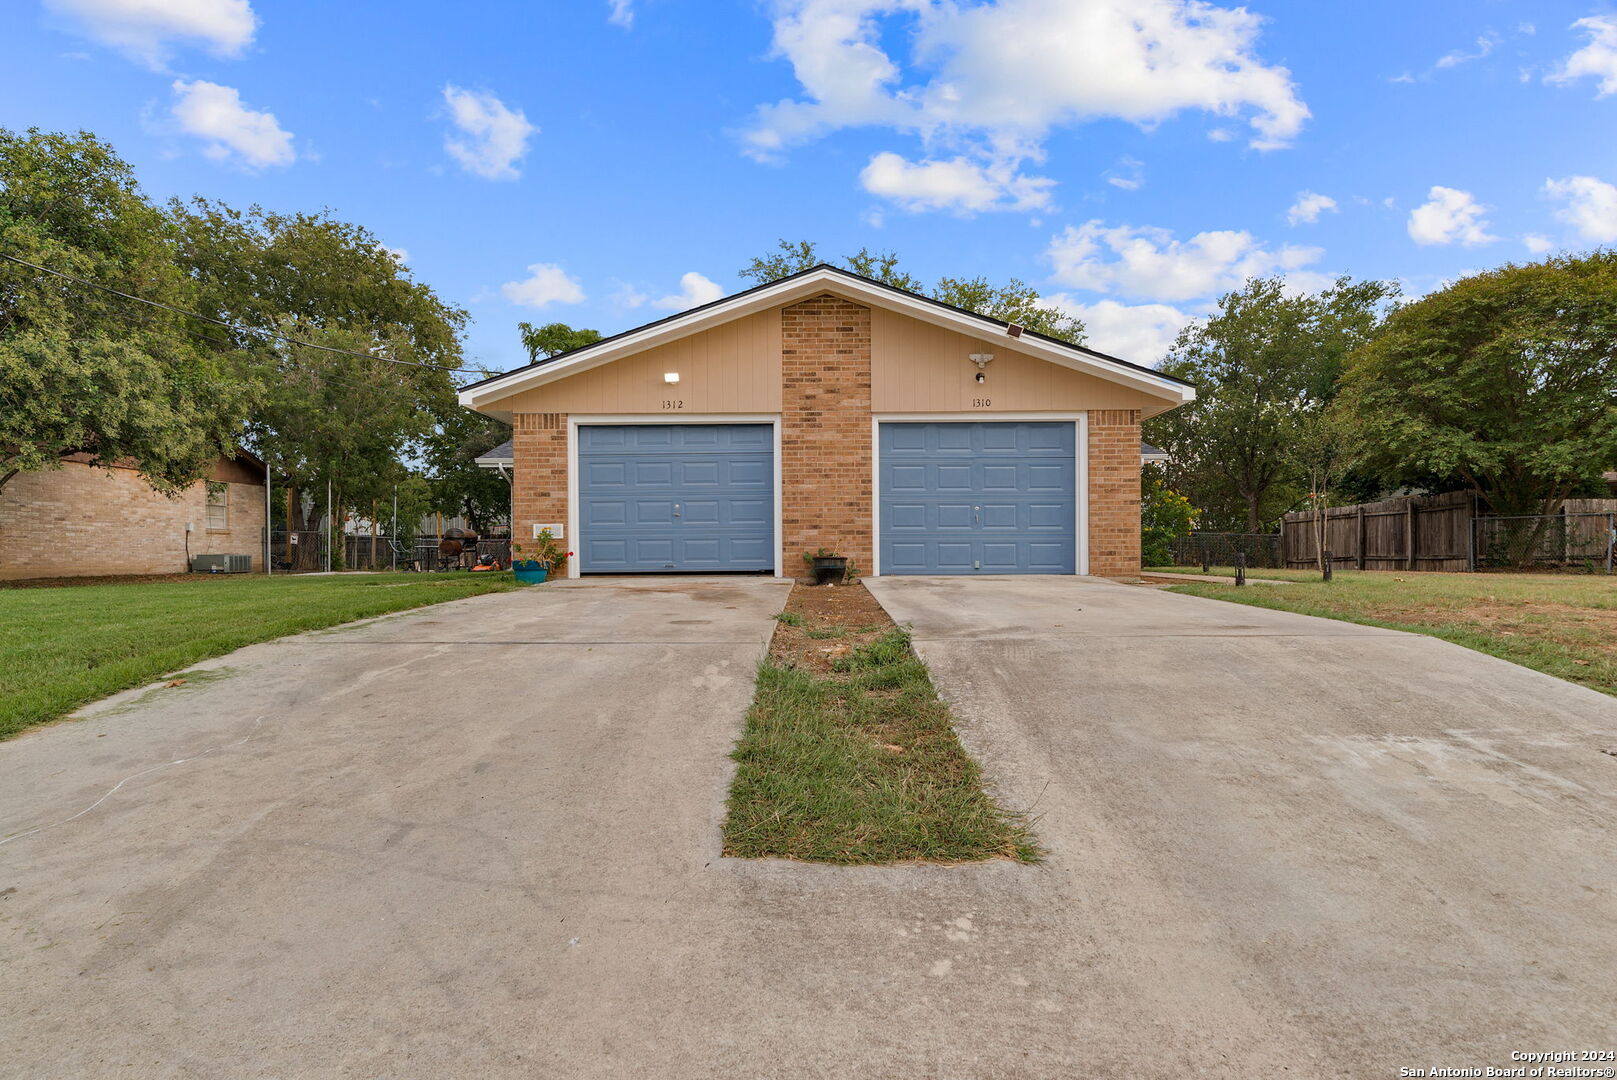 Photo of 1312 Summerwood Dr in New Braunfels, TX